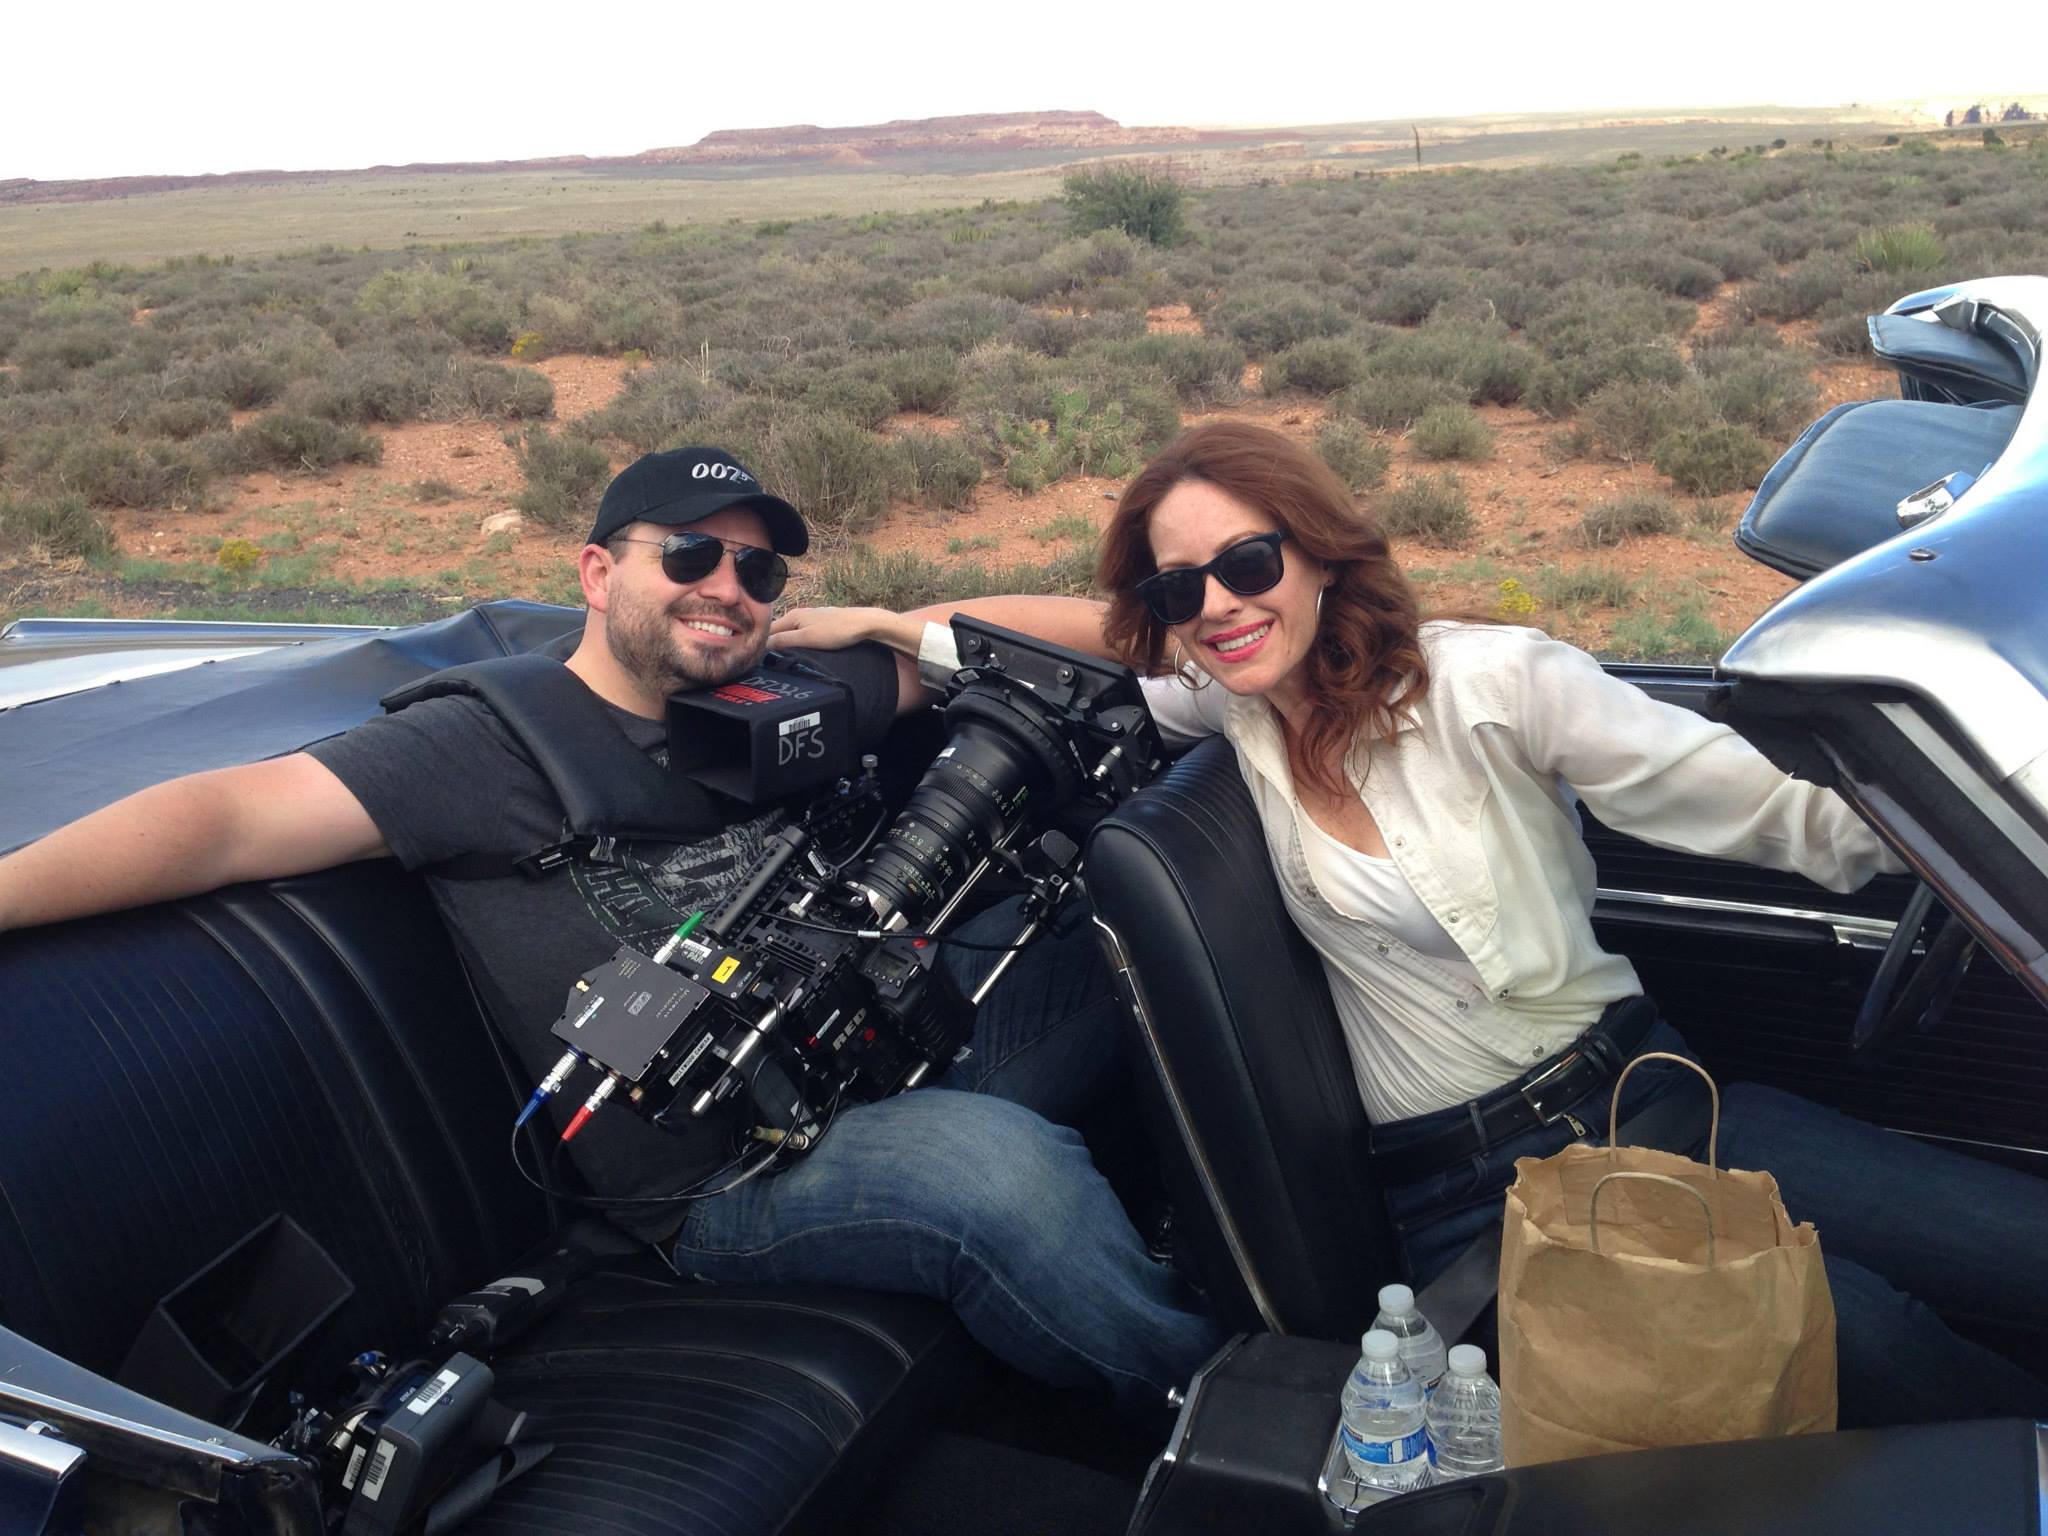 On set at The Grand Canyon shooting a video for Above & Beyond with our uber talented director Kenlon Clark